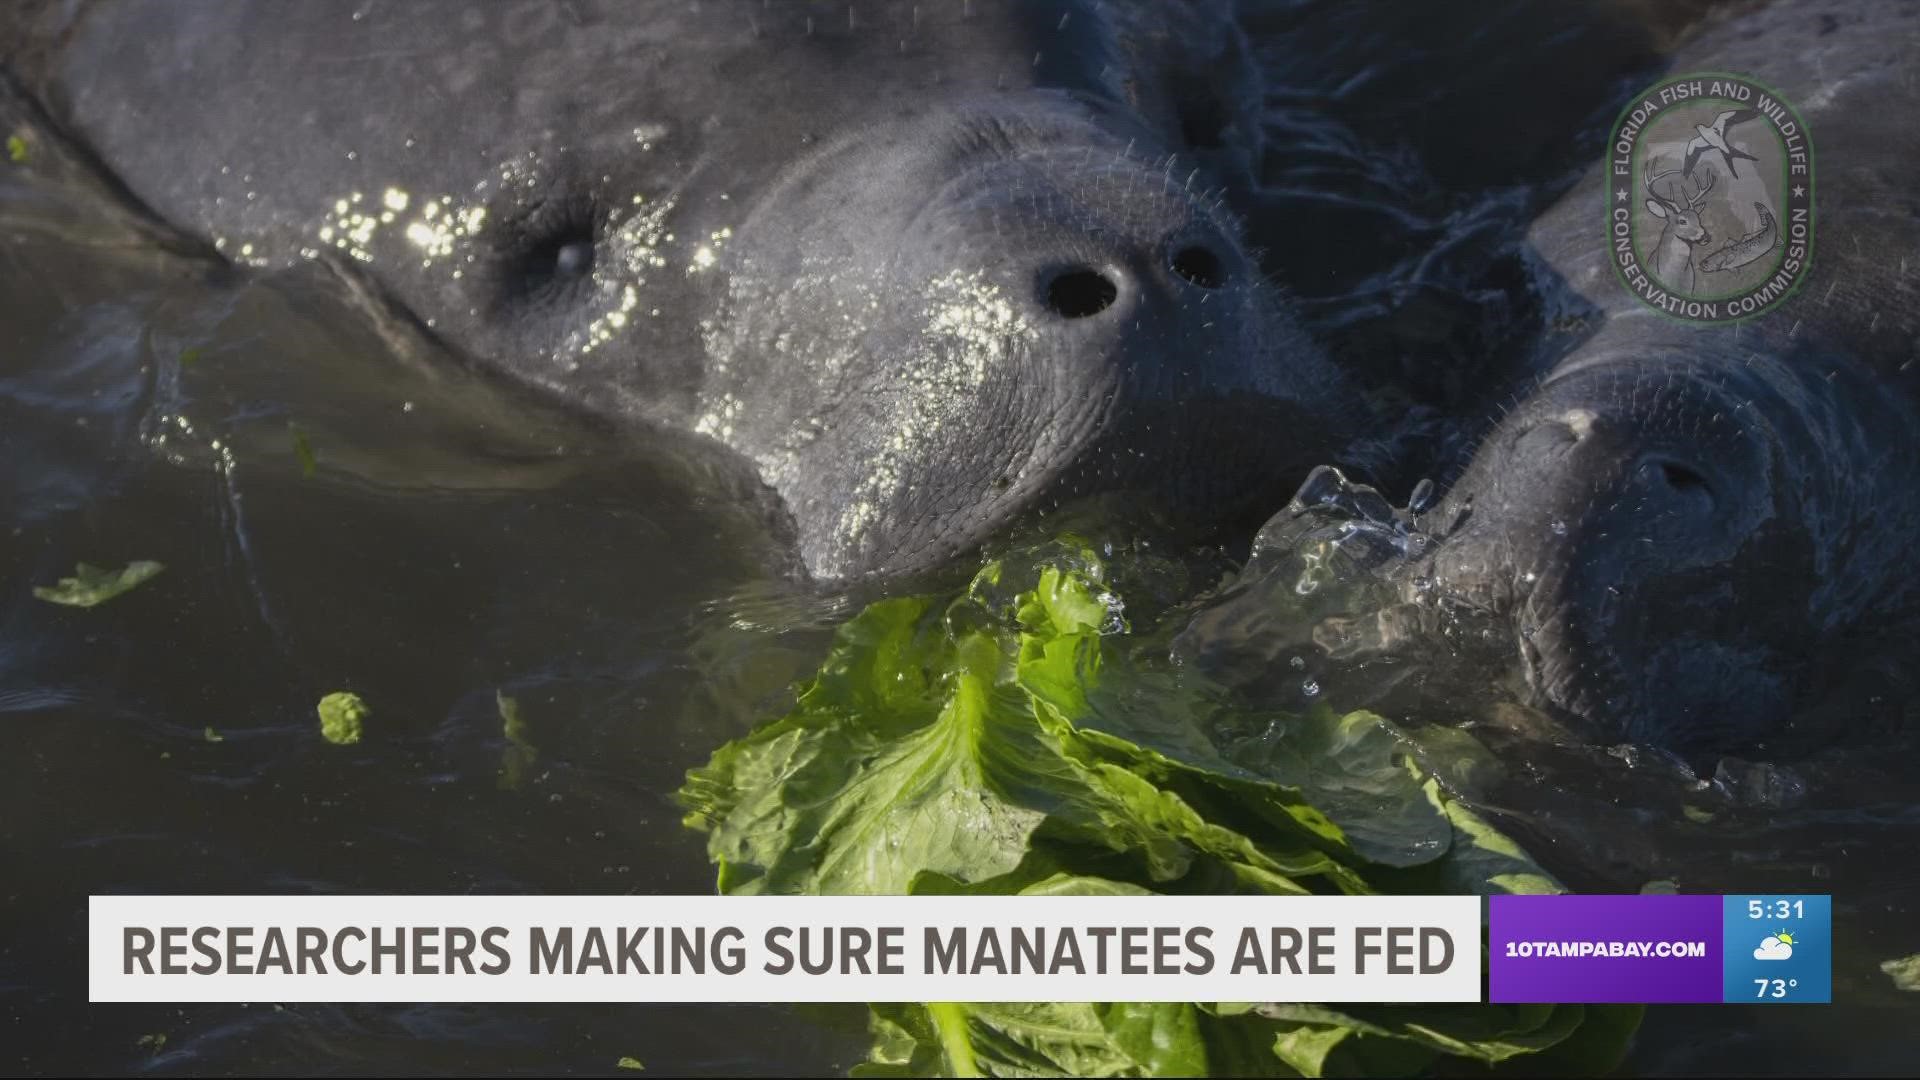 With cooler weather, manatees often choose staying warm over staying fed. FWC is helping sea cows do both.